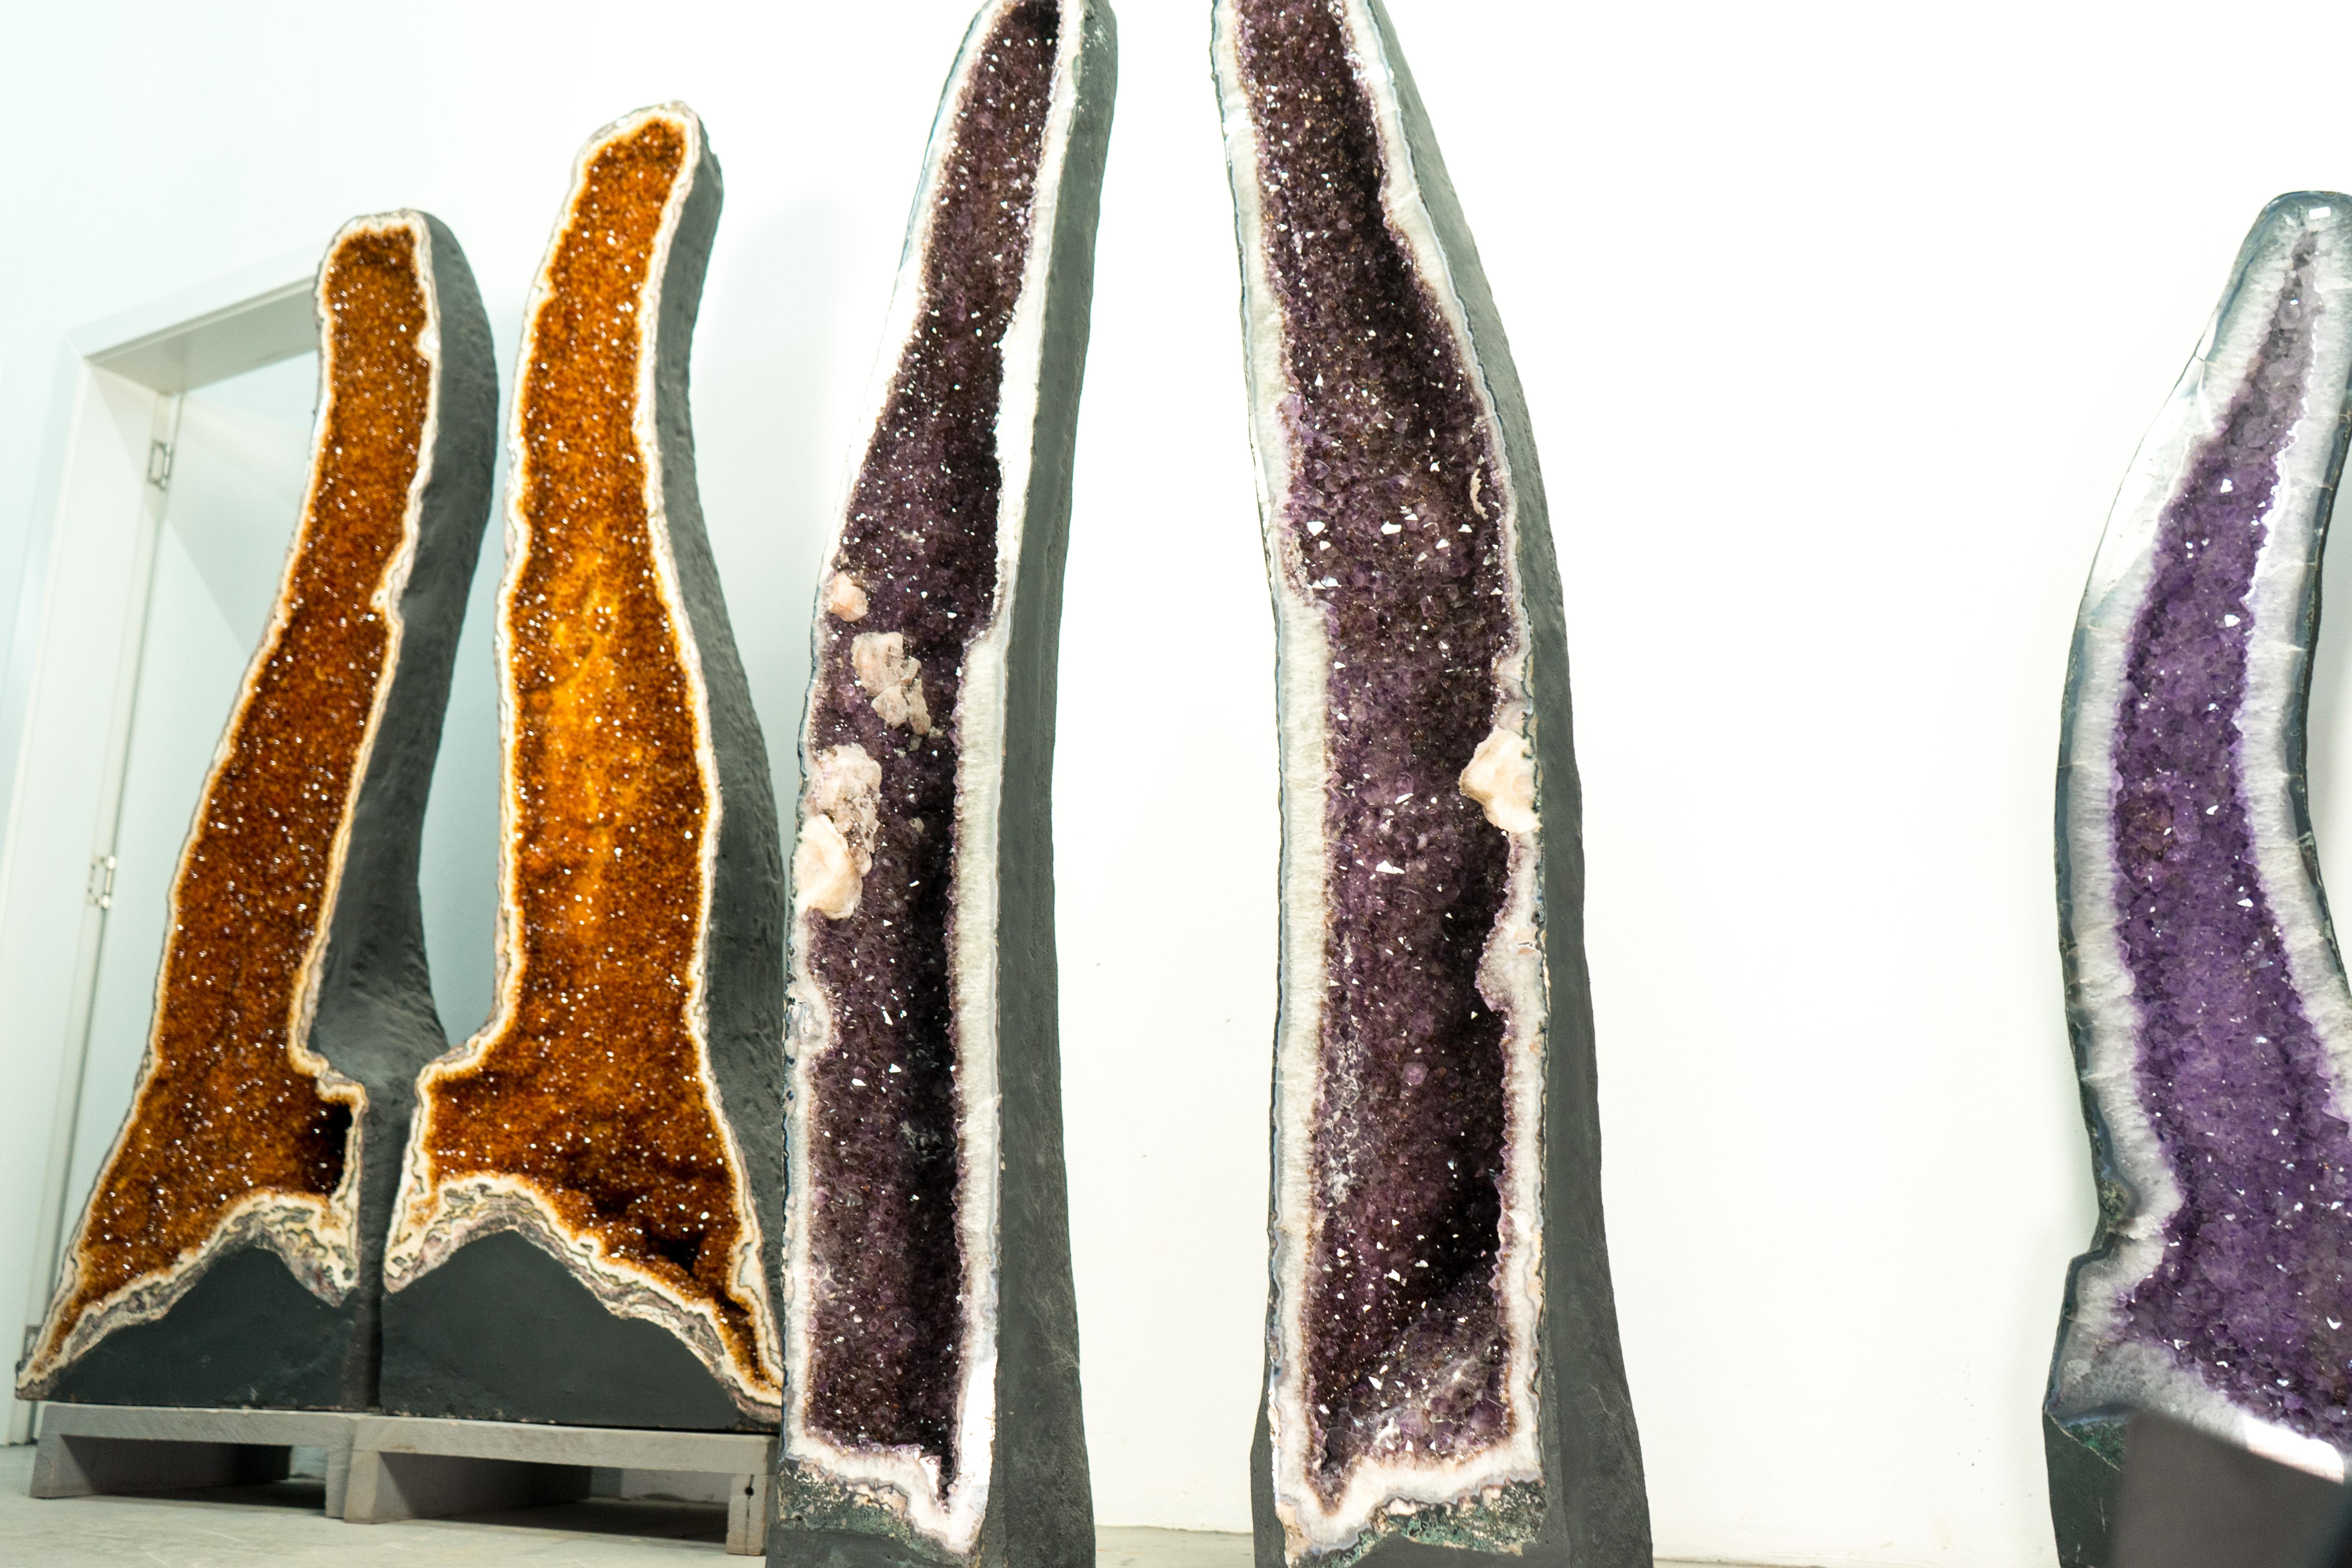 Pair of 5 Ft Tall Large Amethyst Geode Cathedrals with Sparkly Lavender Amethyst For Sale 7